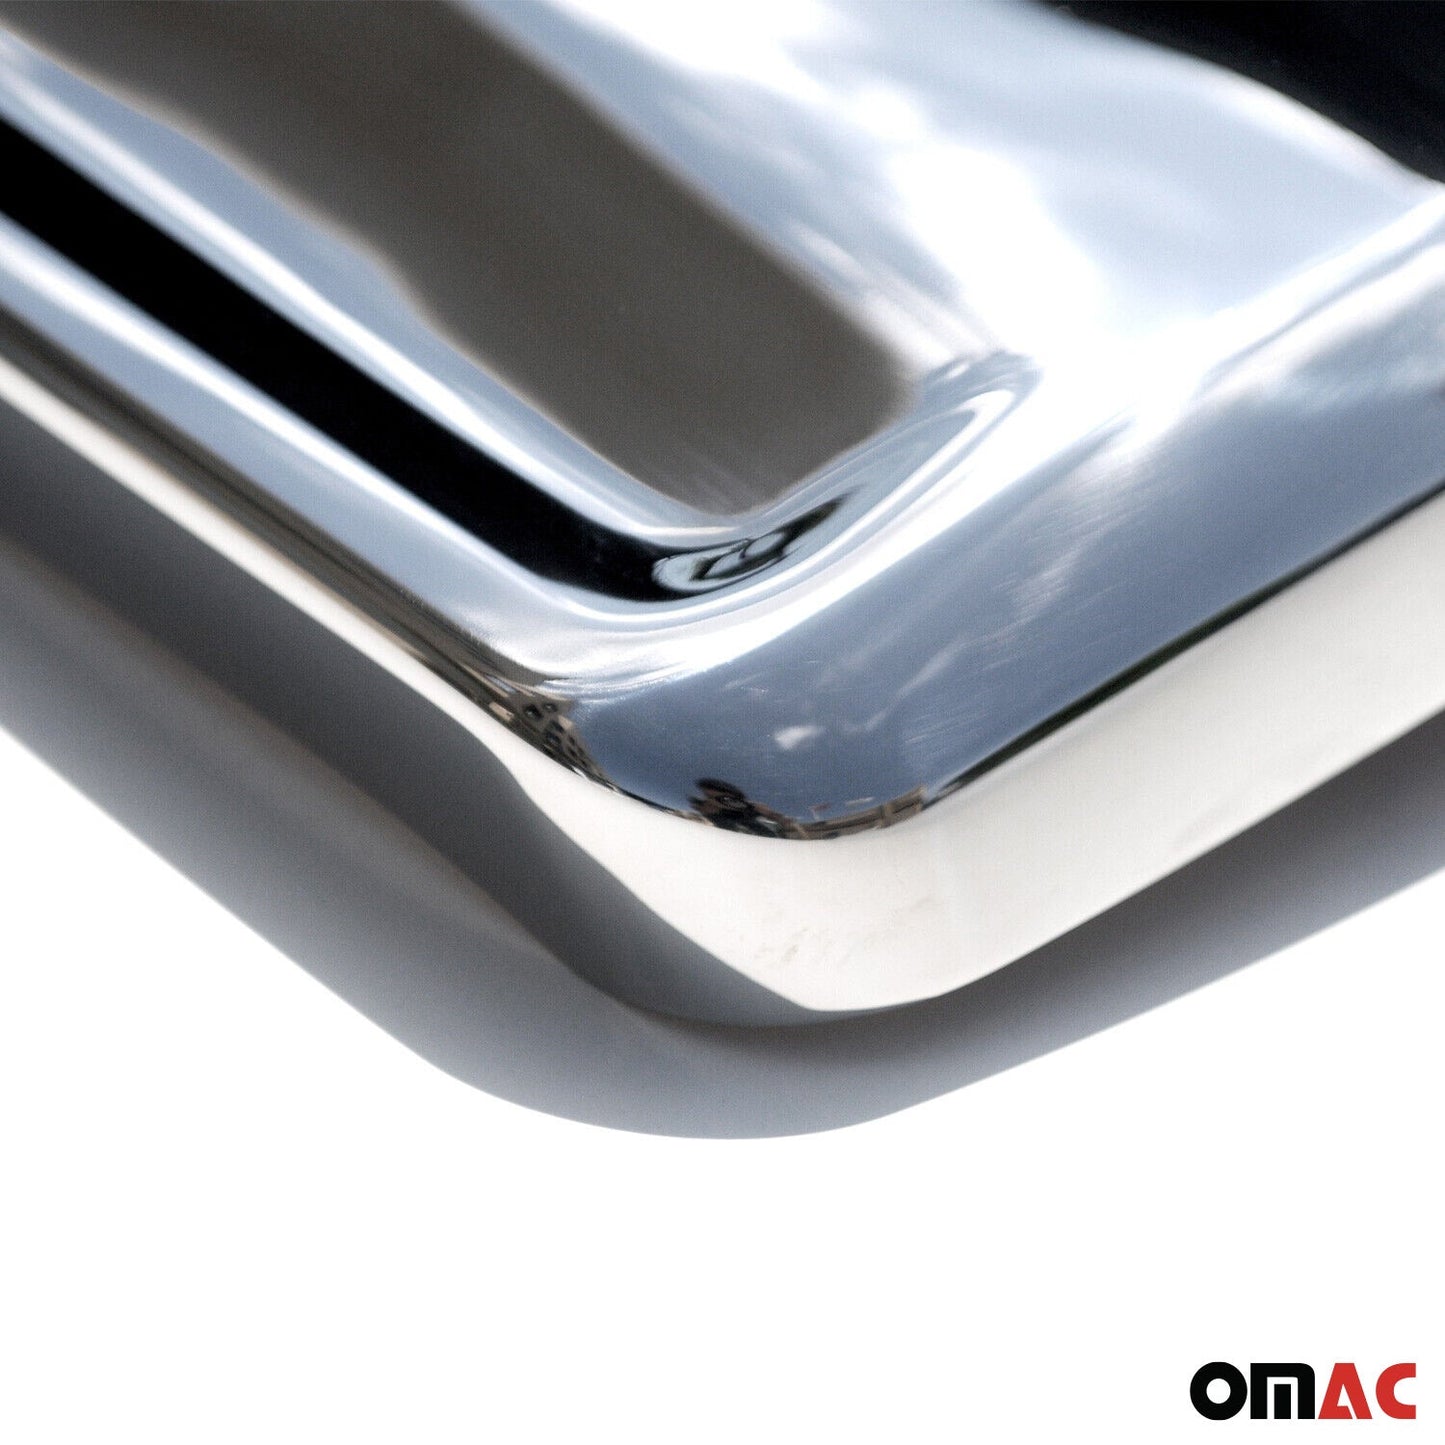 OMAC Side Mirror Cover Caps Fits Mercedes Sprinter W906 2010-2018 Steel Silver 2 Pcs 4724111